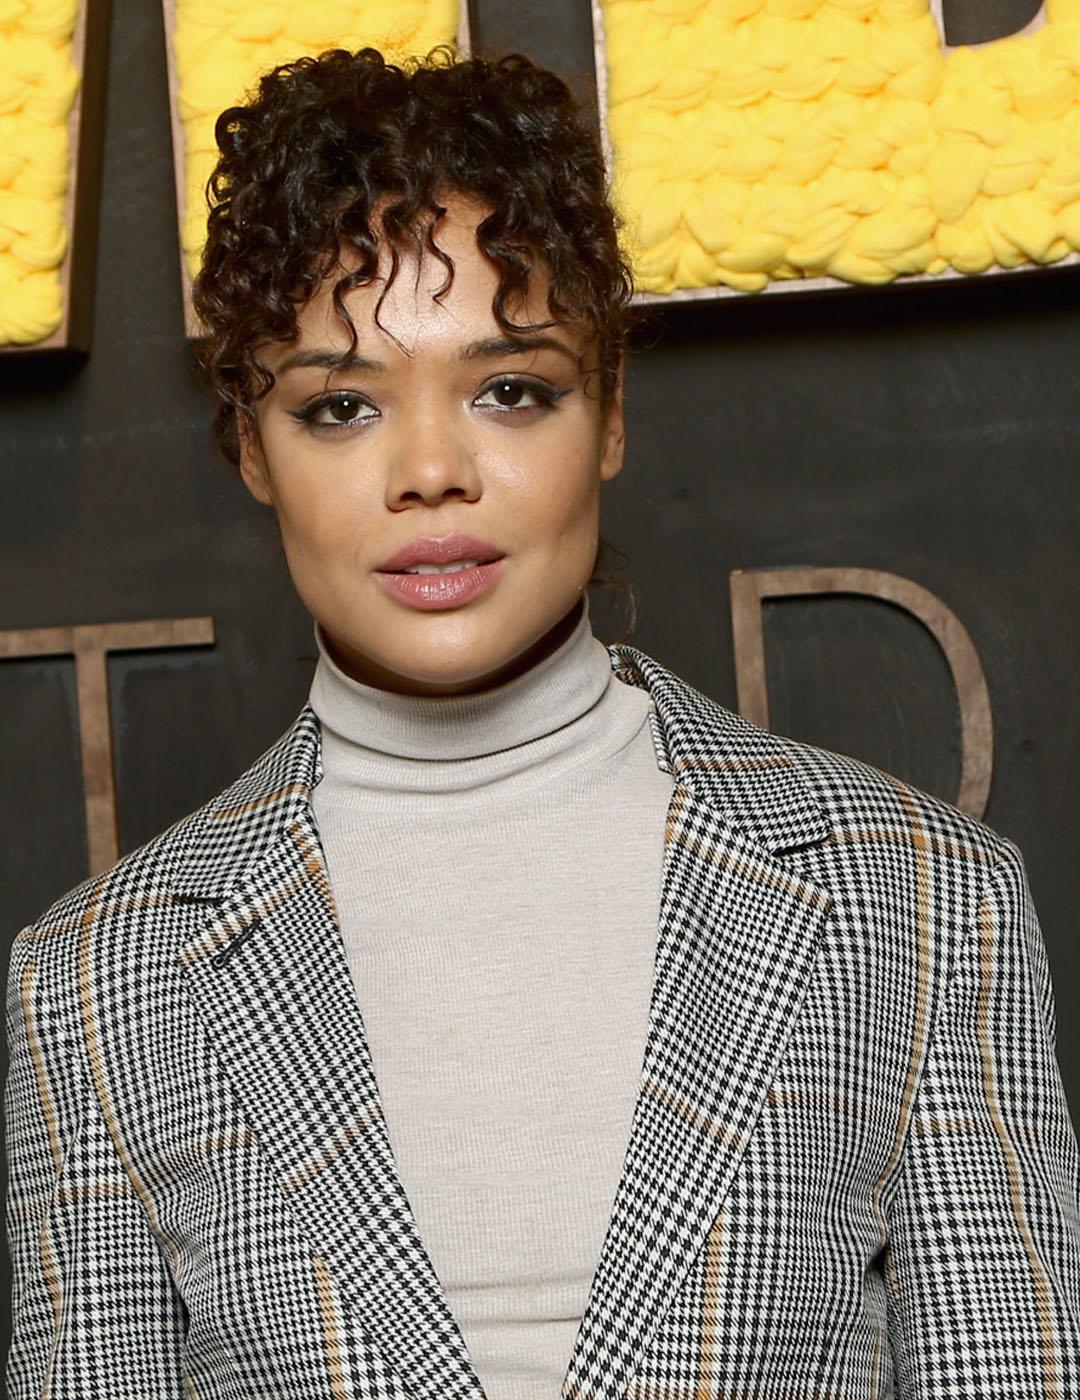 A photo of Tessa Thompson in her ivory-colored inner turtleneck topped with a stripe coat that accentuates her dark curly fringe hair on top of her face